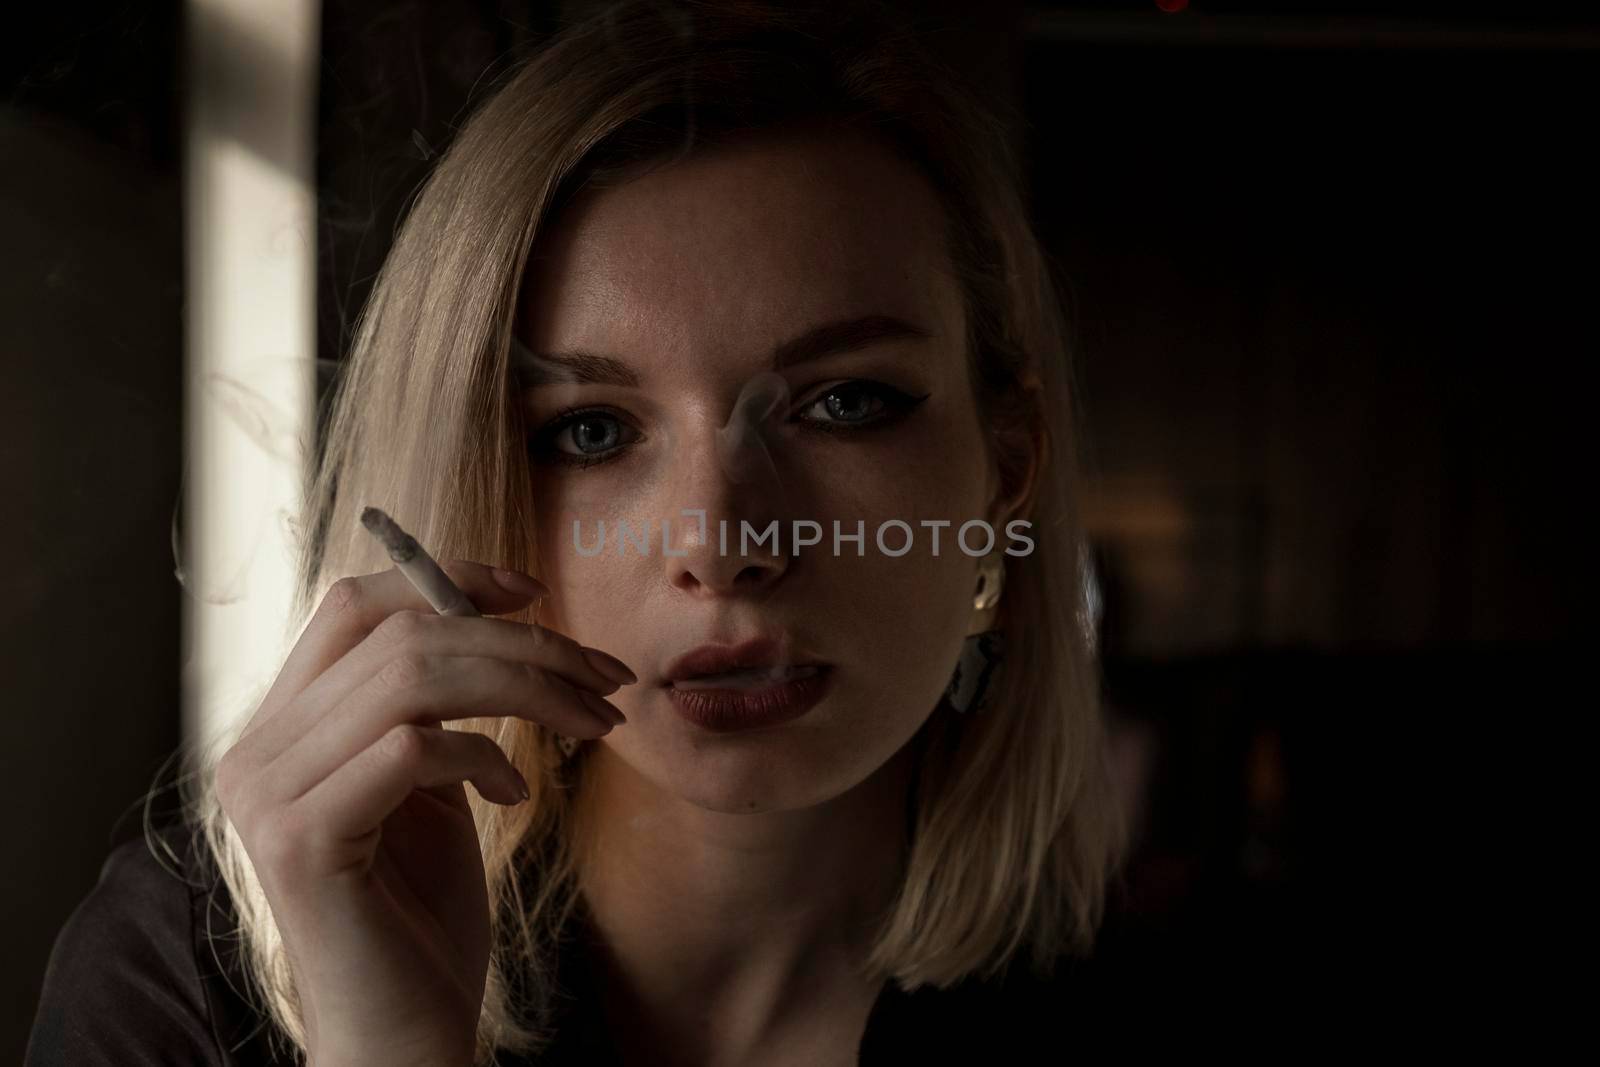 Close-Up Of Young Woman Smoking Cigarette By Window